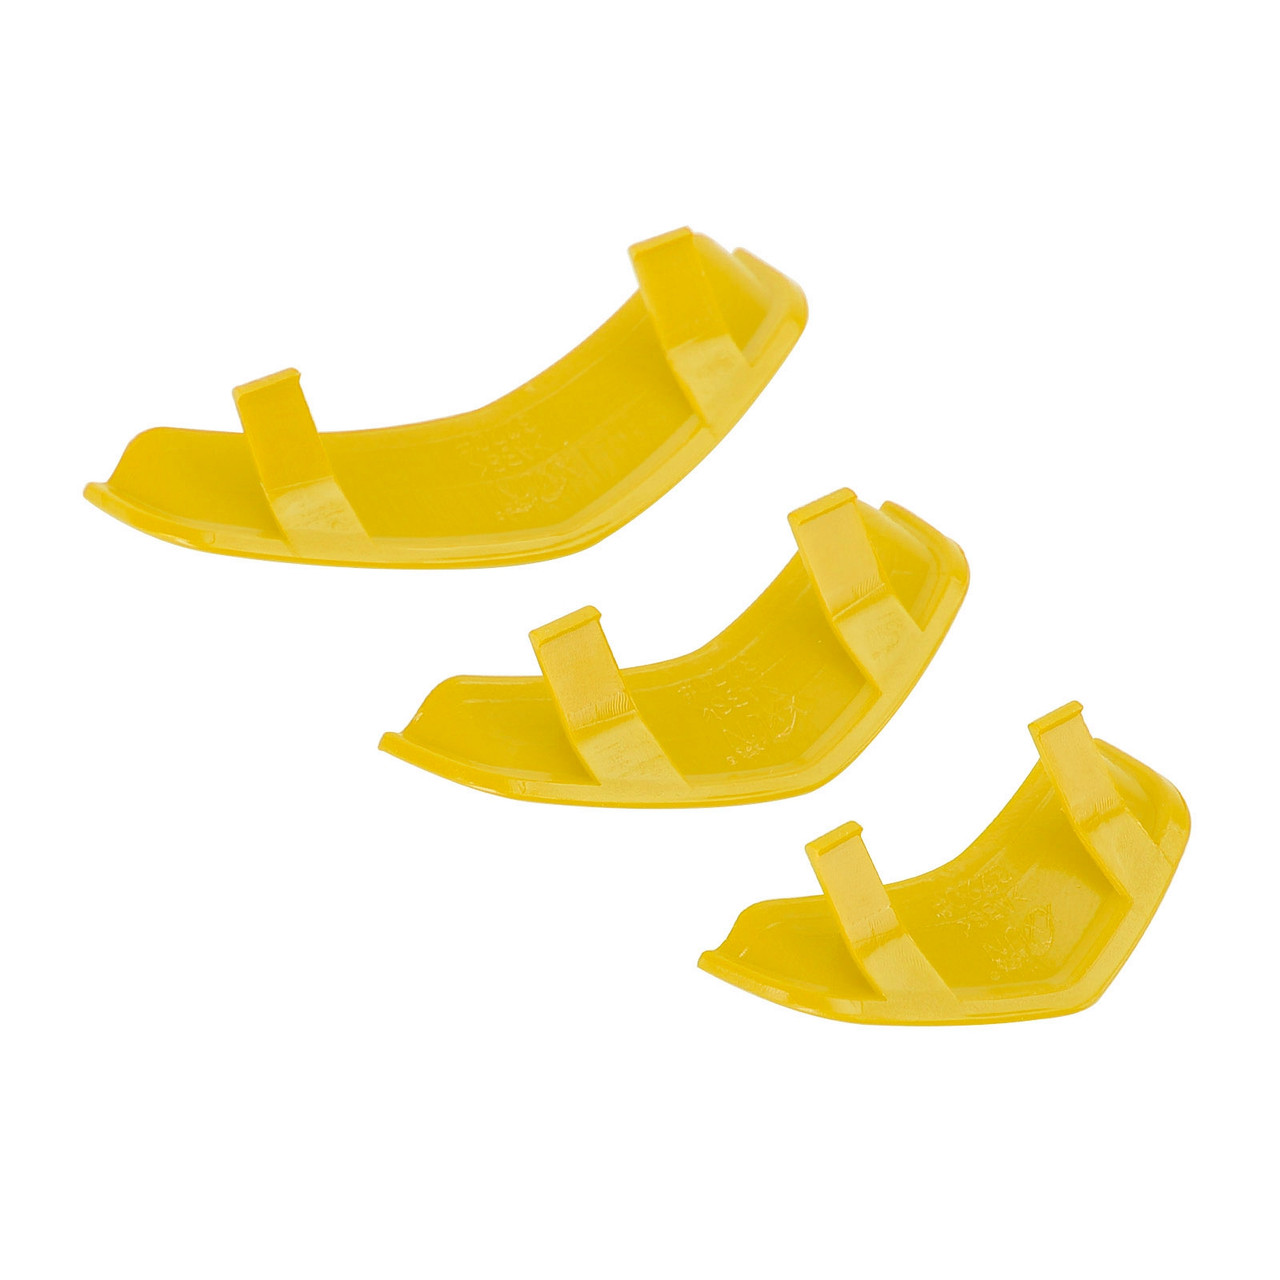 Front Horn Cover Decoration Trim For Vespa Sprint 300 GTS 300 HPE GTV Yellow